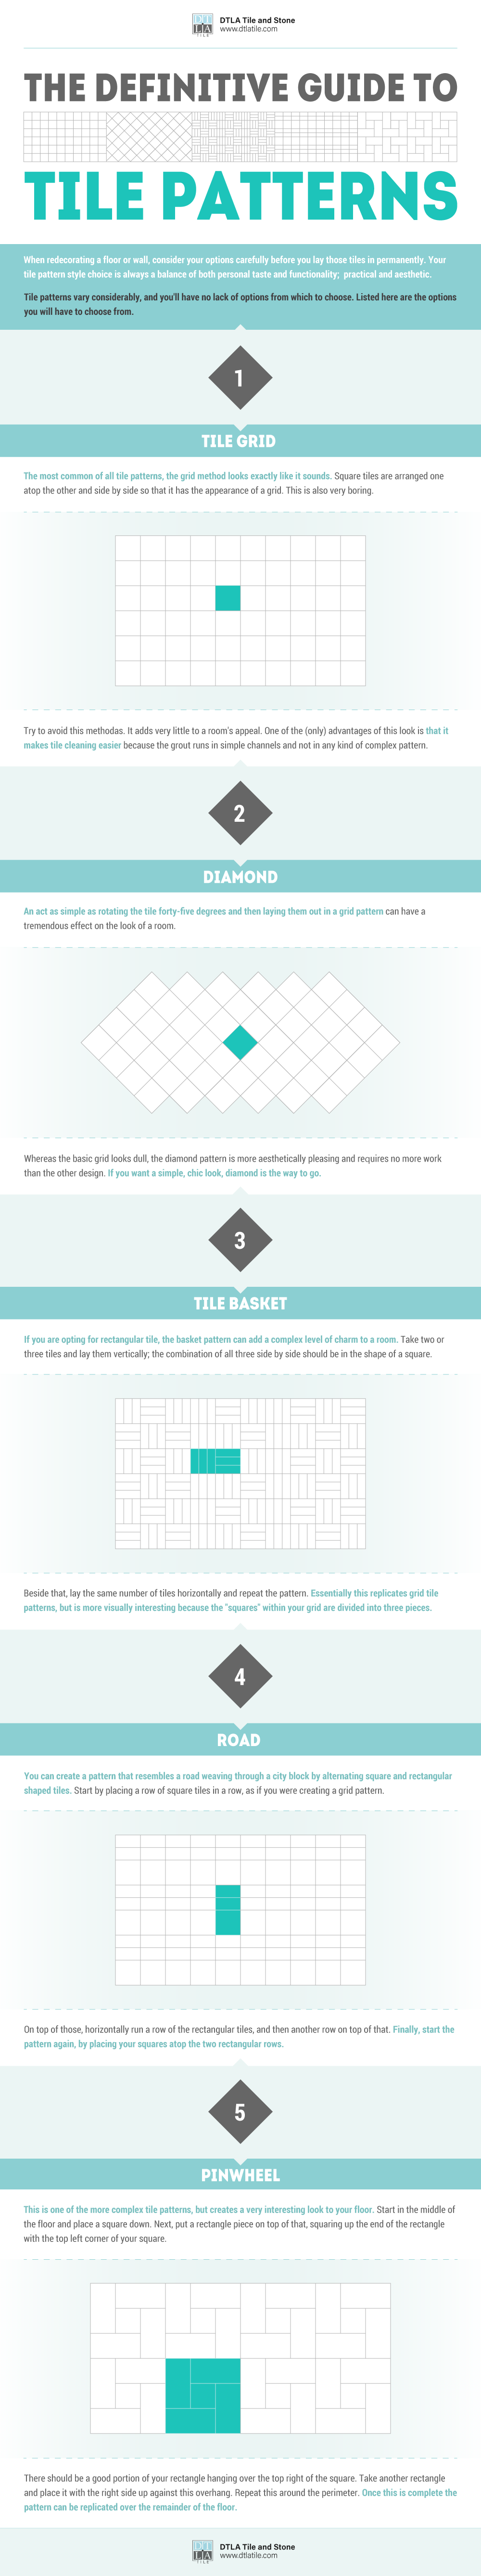 The Definitive Guide To Tile Patterns Infographic